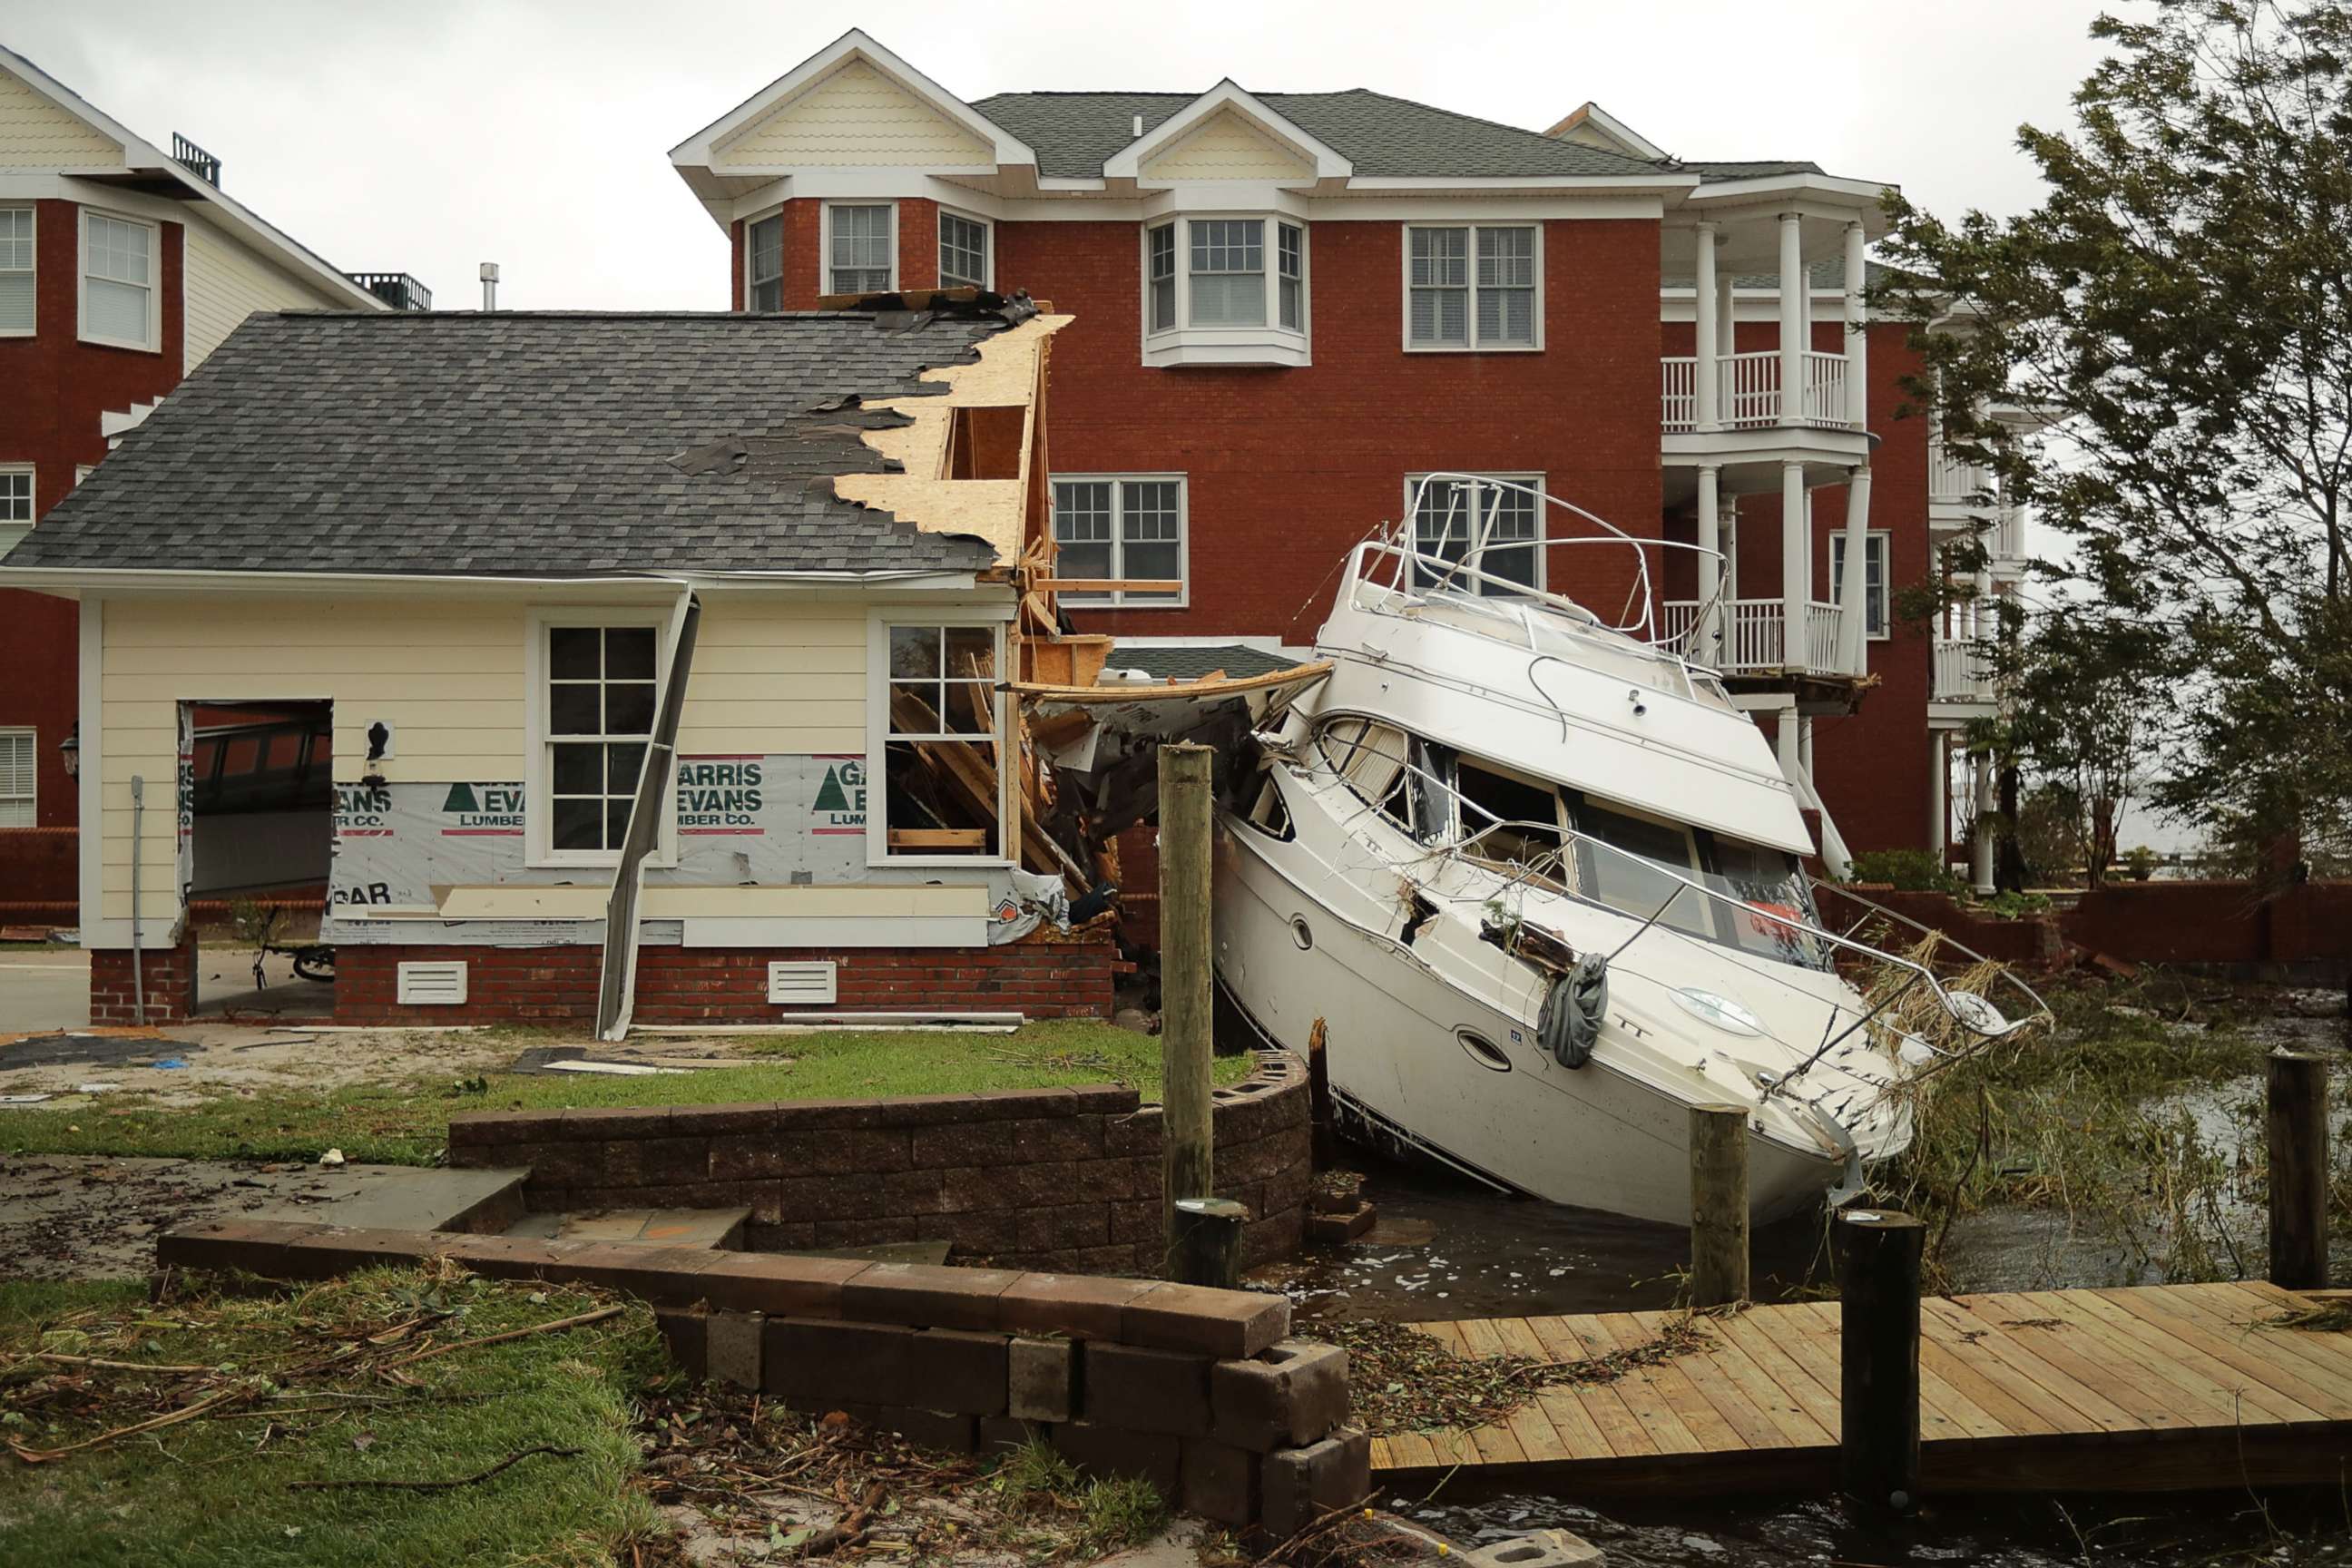 PHOTO: A boat lays smashed against a car garage, deposited there by the high winds and storm surge from Hurricane Florence along the Neuse River, Sept. 15, 2018, in New Bern, N.C.